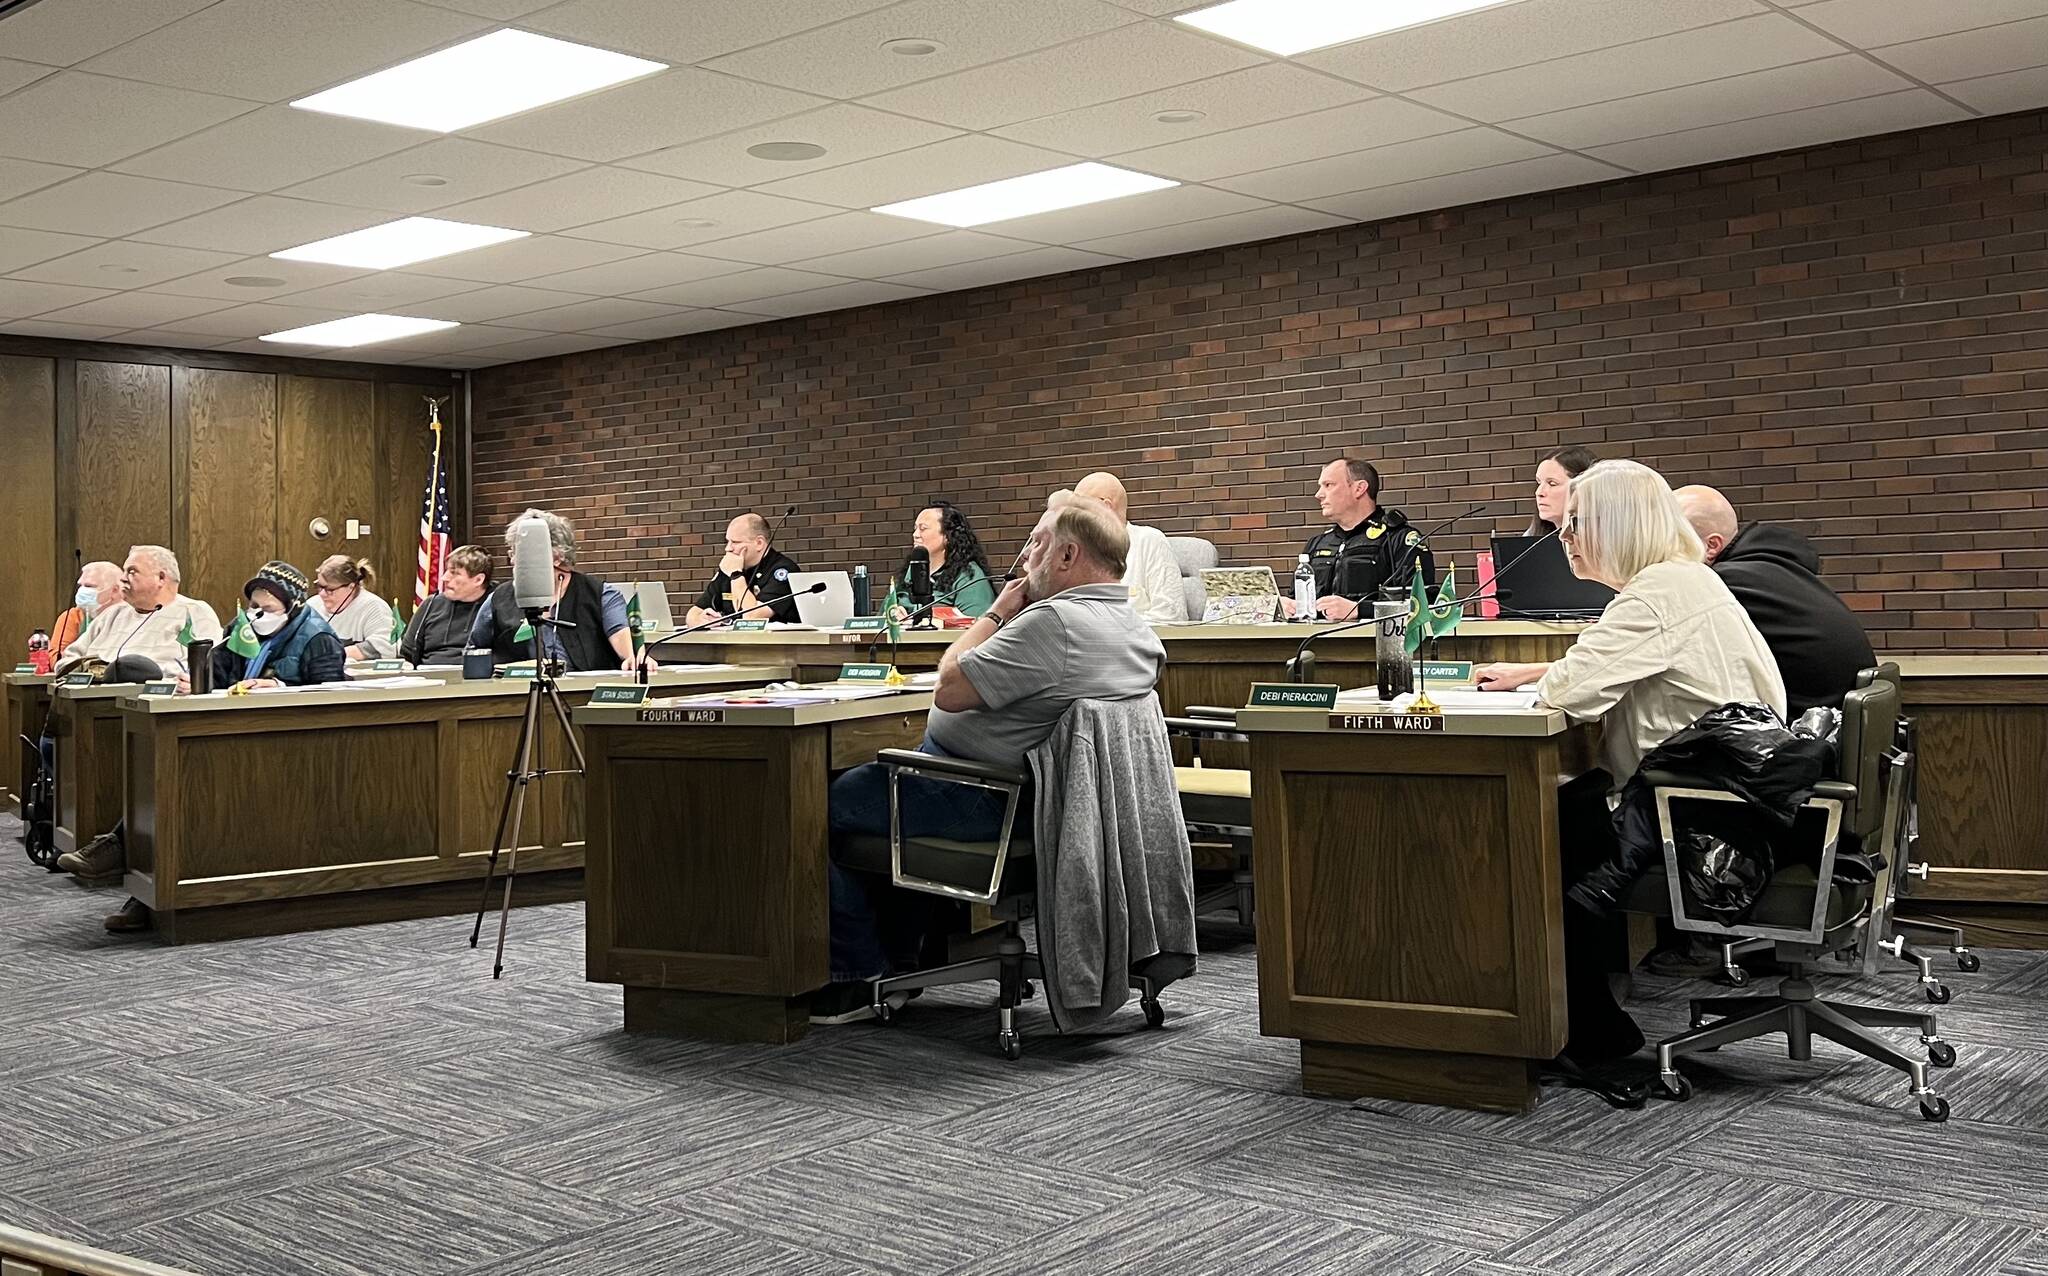 Clayton Franke / The Daily World
The Aberdeen City Council sits in its city hall chambers during a meeting Wednesday, March. 13, when a request to reconsider lodging tax funding for Harbor Art Guild, a nonprofit run by Mayor Doug Orr, was struck from the agenda.